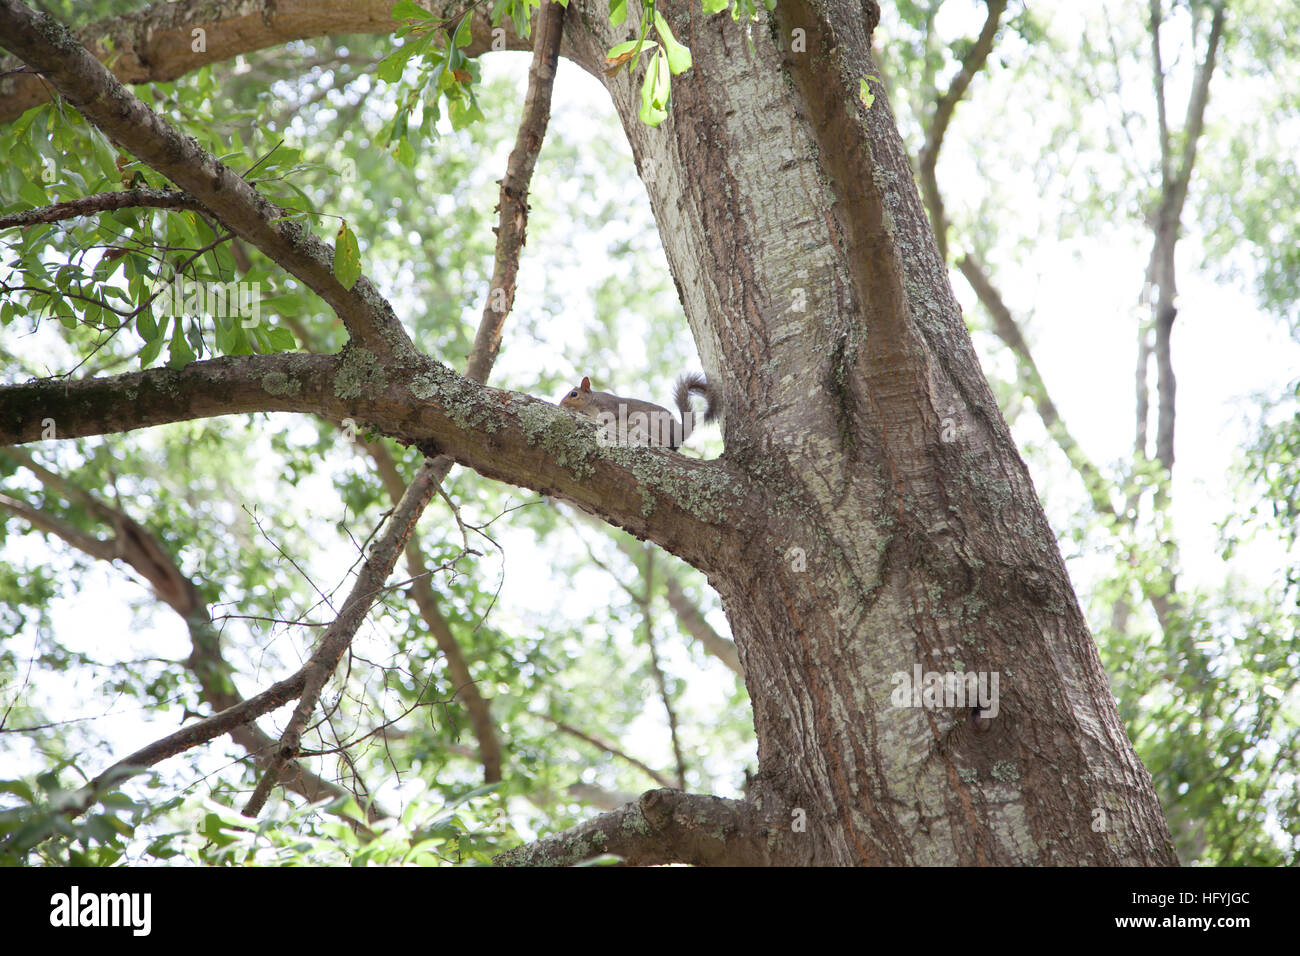 Eastern gray squirrels mating in a tree Stock Photo